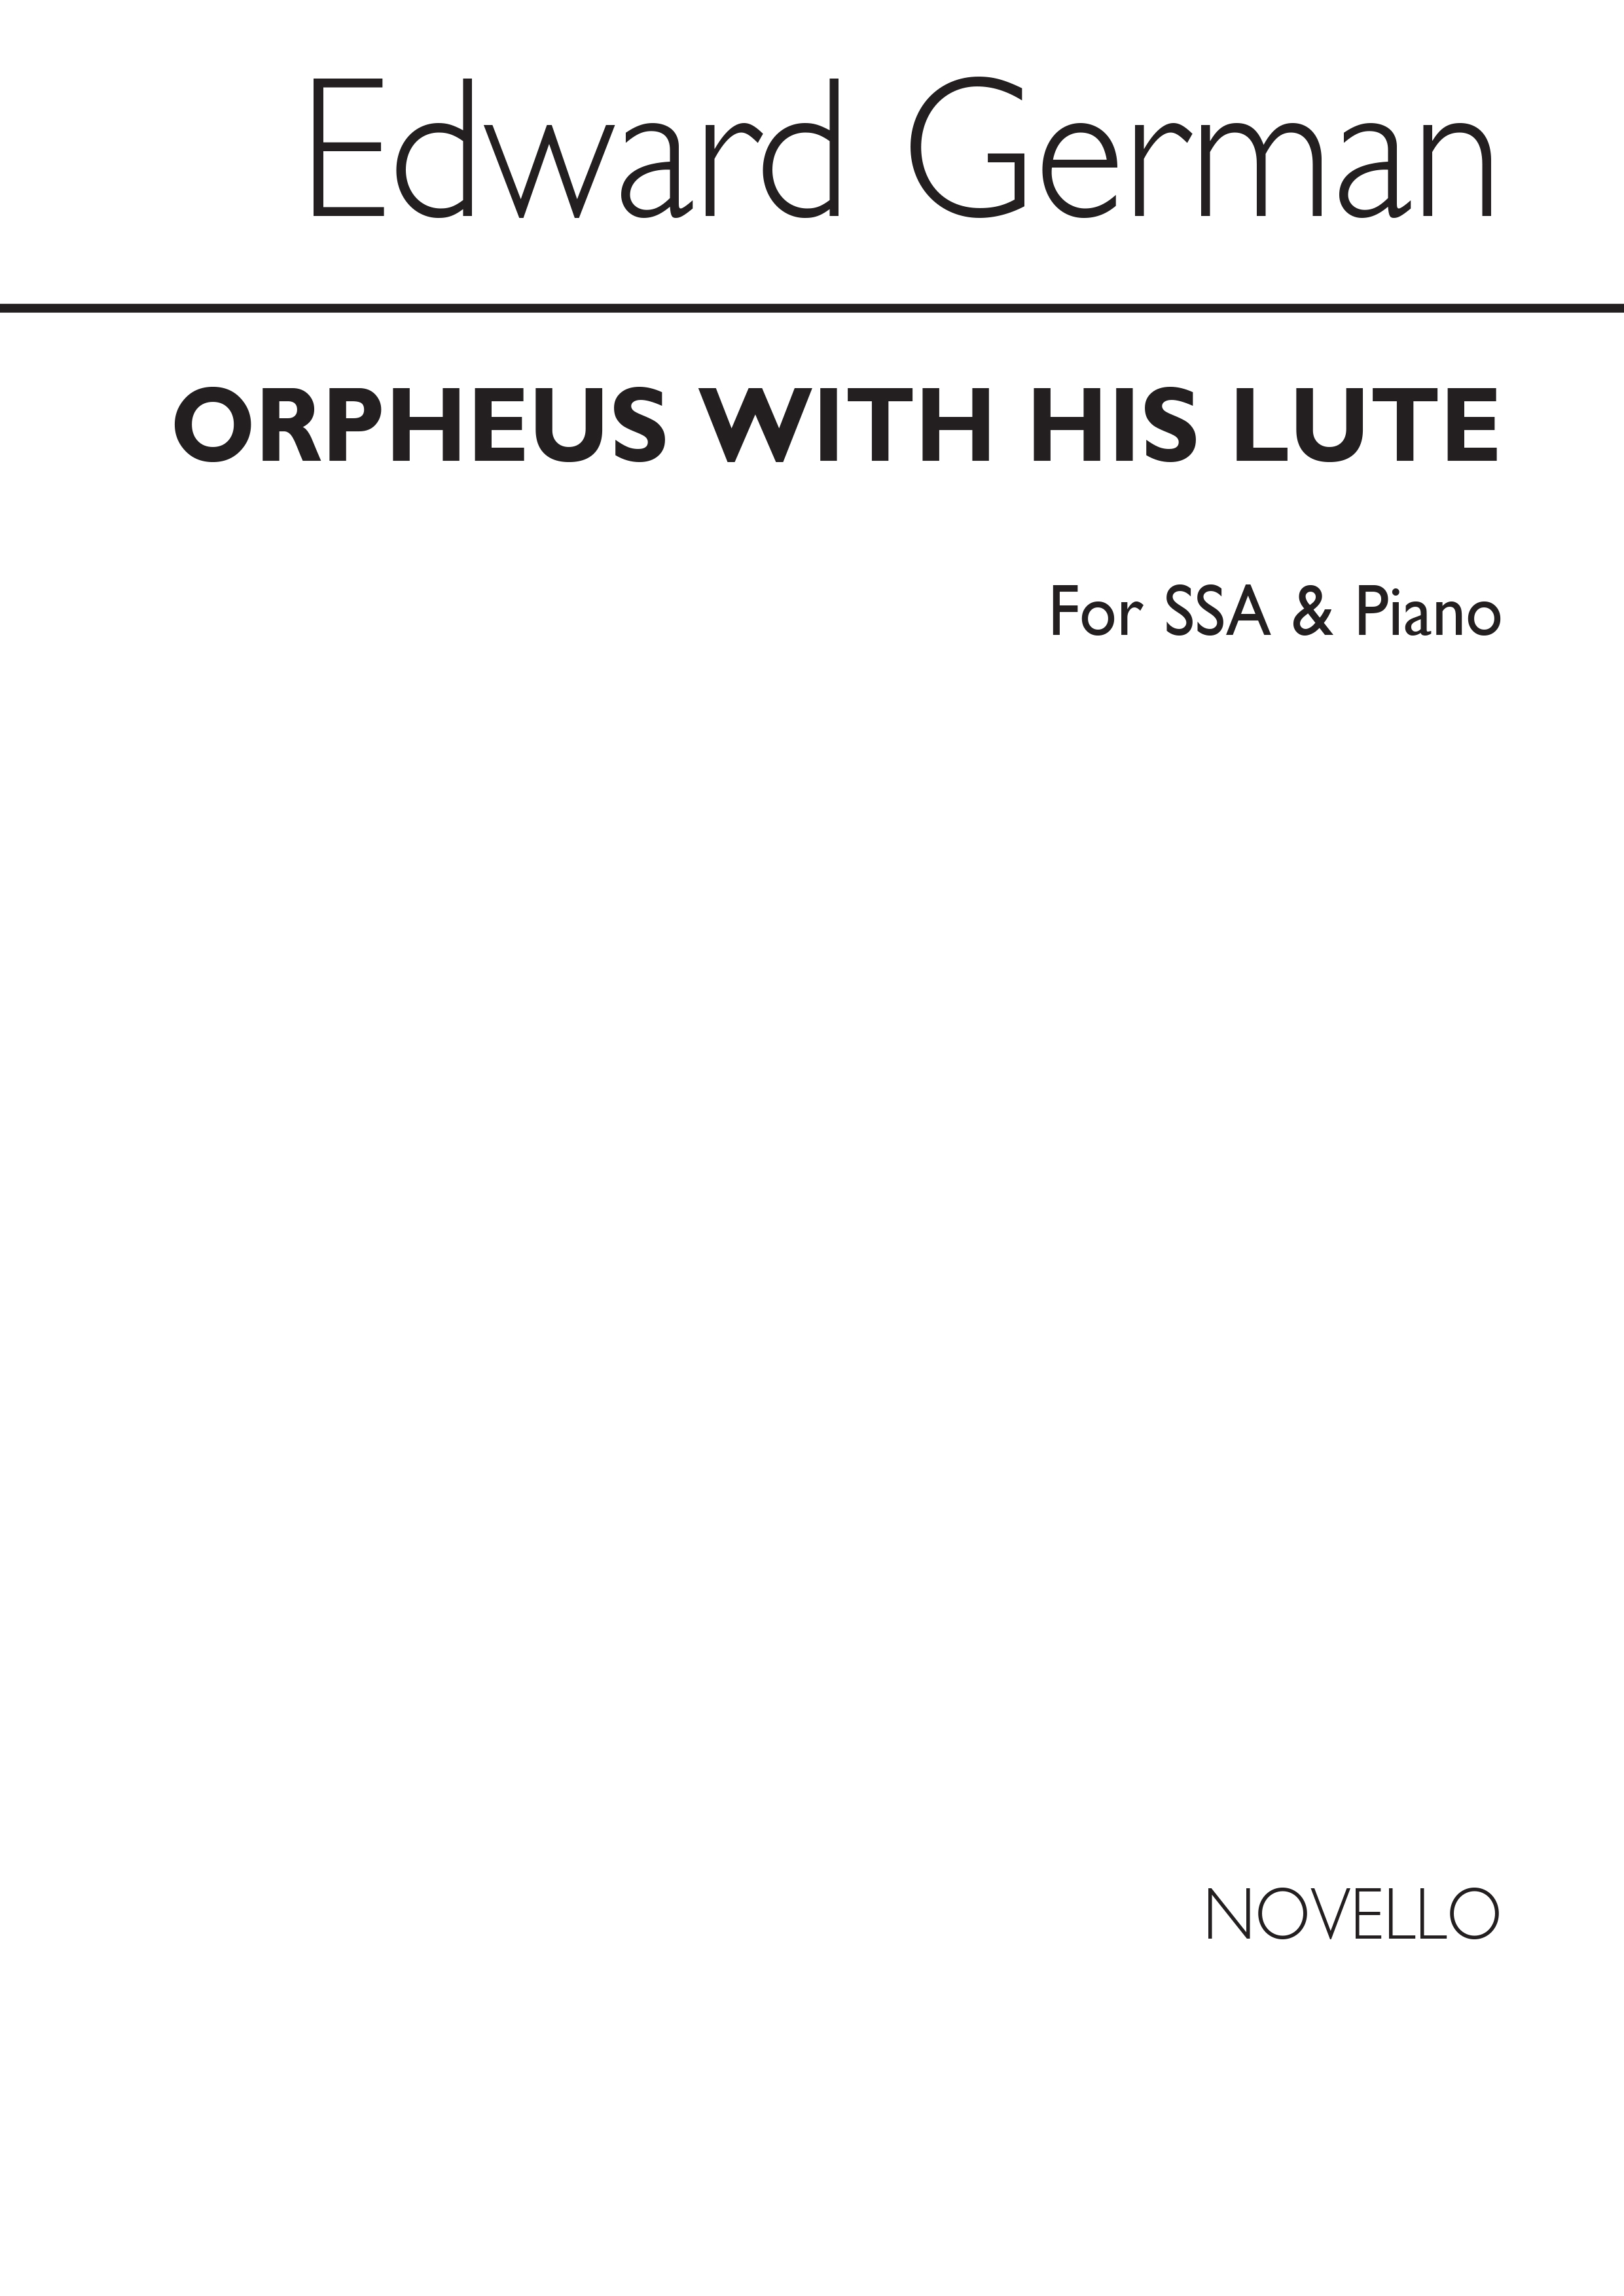 Edward German: Orpheus With His Lute Ssa/Piano